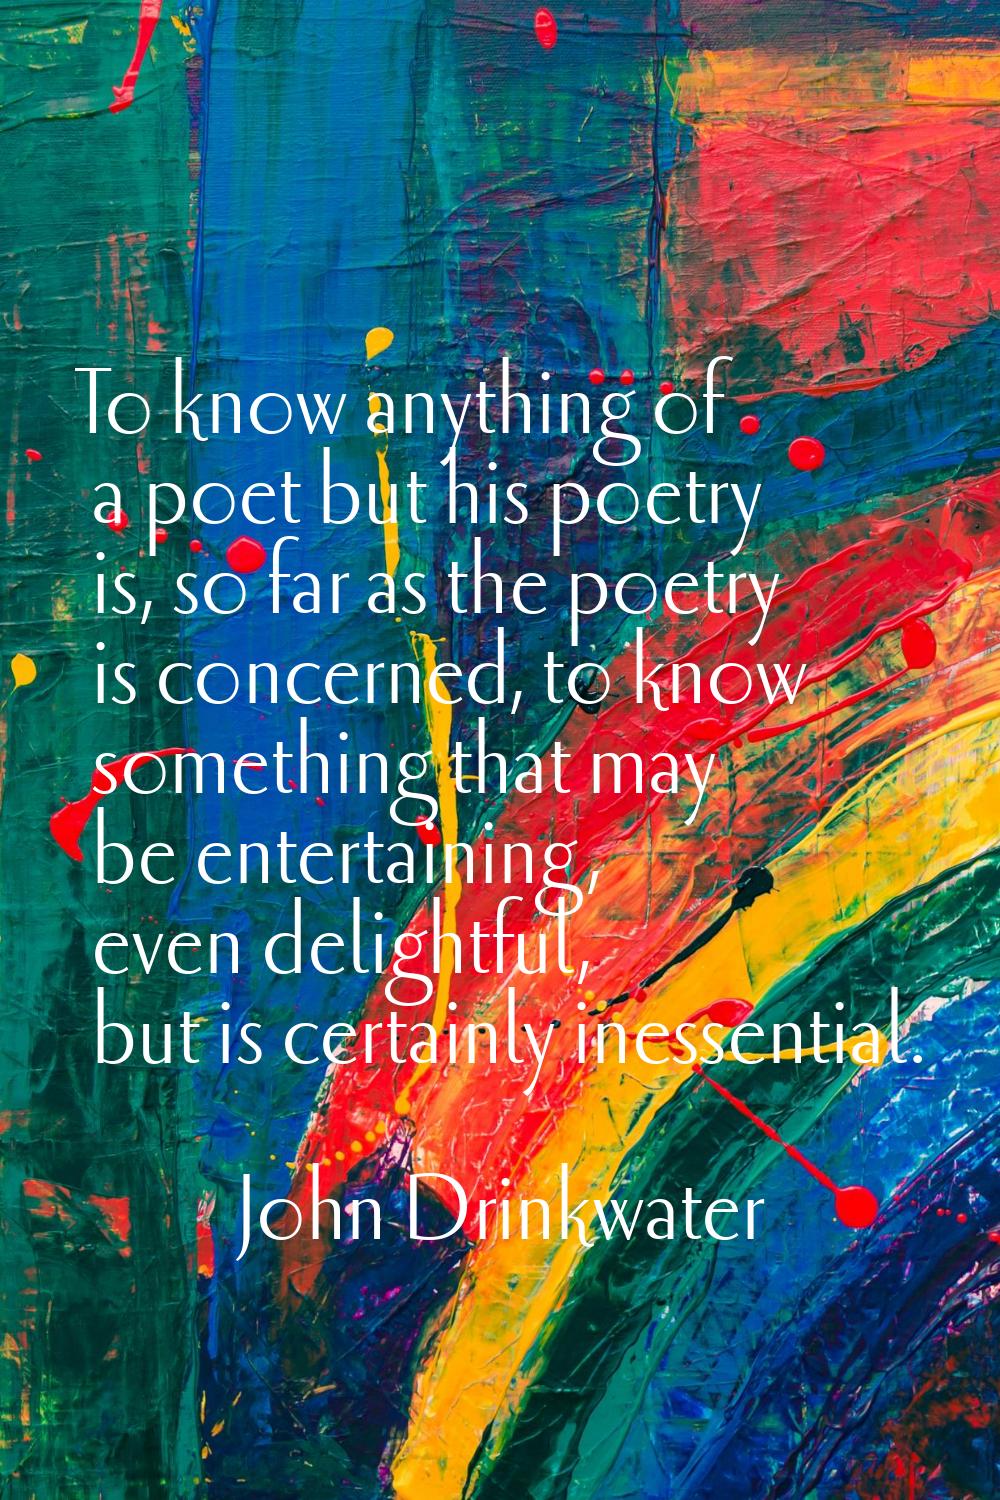 To know anything of a poet but his poetry is, so far as the poetry is concerned, to know something 